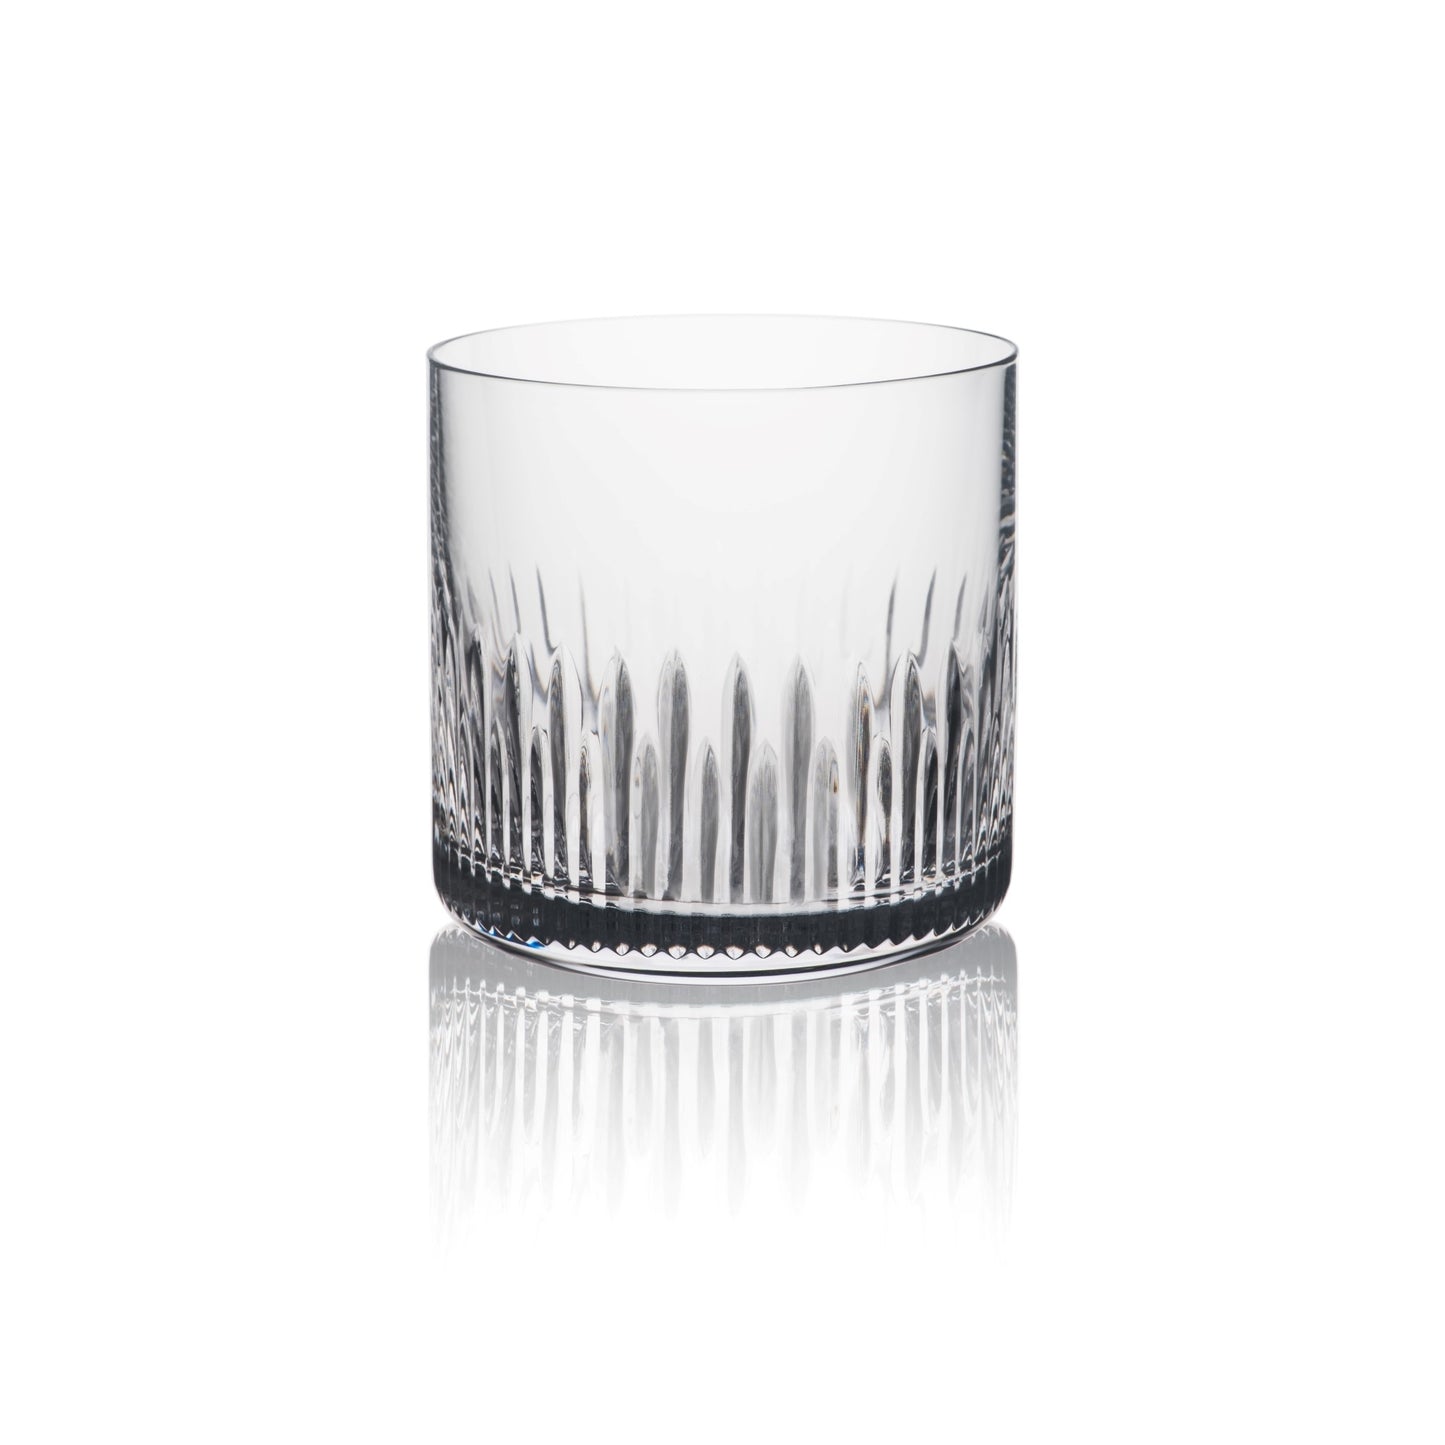 Cumberland Old Fashioned Whisky Glass, Set of 6